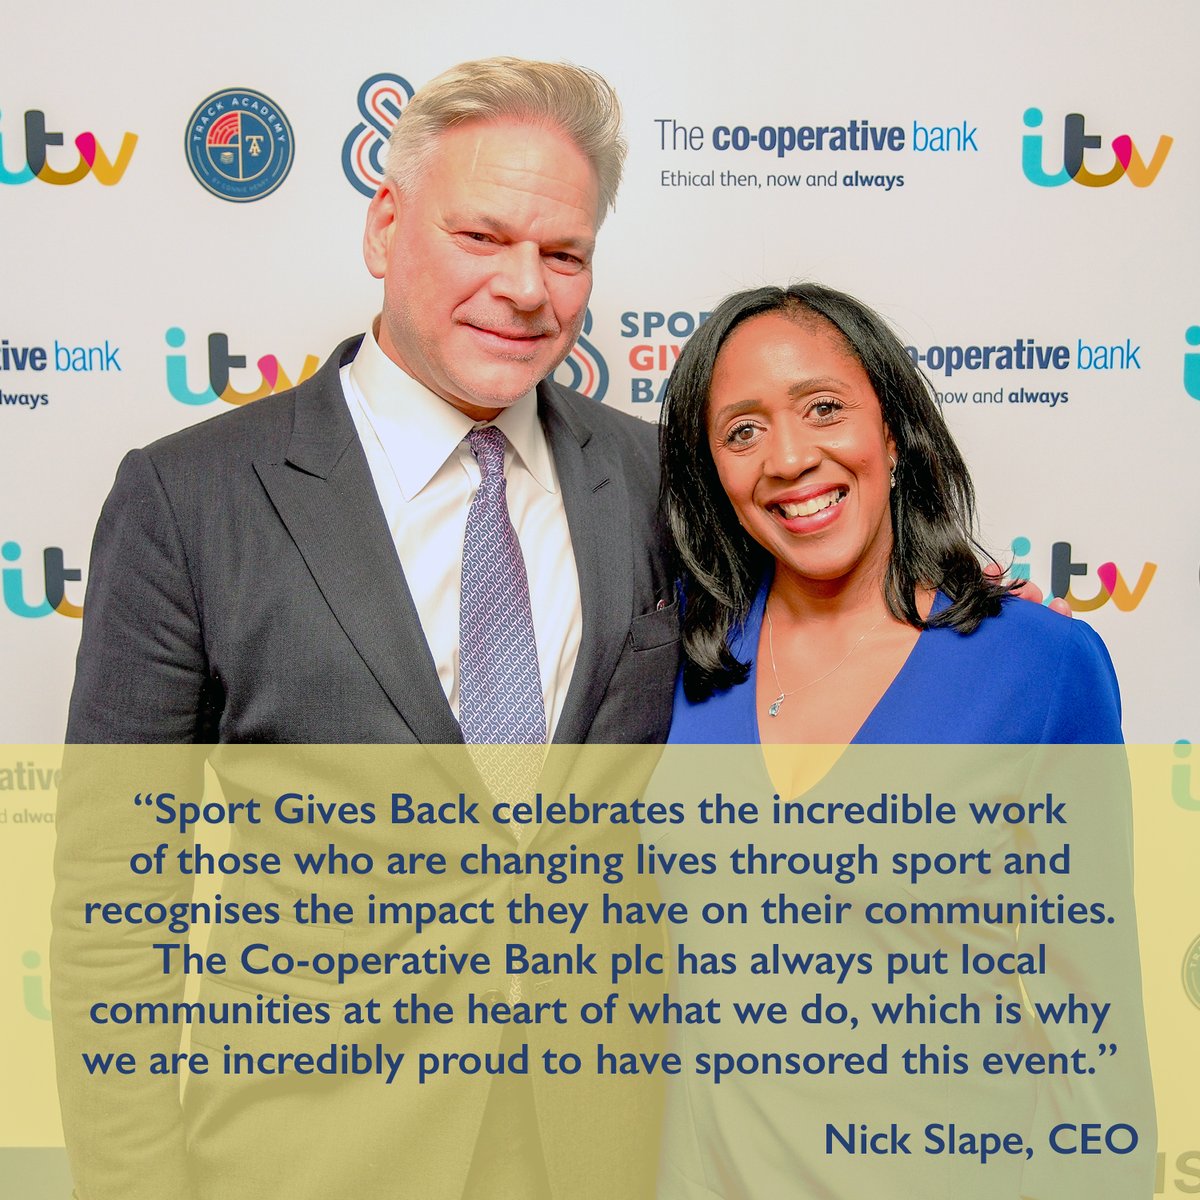 And now for a word from our sponsor…thanks as ever to the proud sponsors of Sport Gives Back, @CooperativeBank. If you haven’t caught up with the broadcast on @itv yet, what are you waiting for? Stream now on ITV X 😀 For more information, visit bit.ly/SportGivesBack….